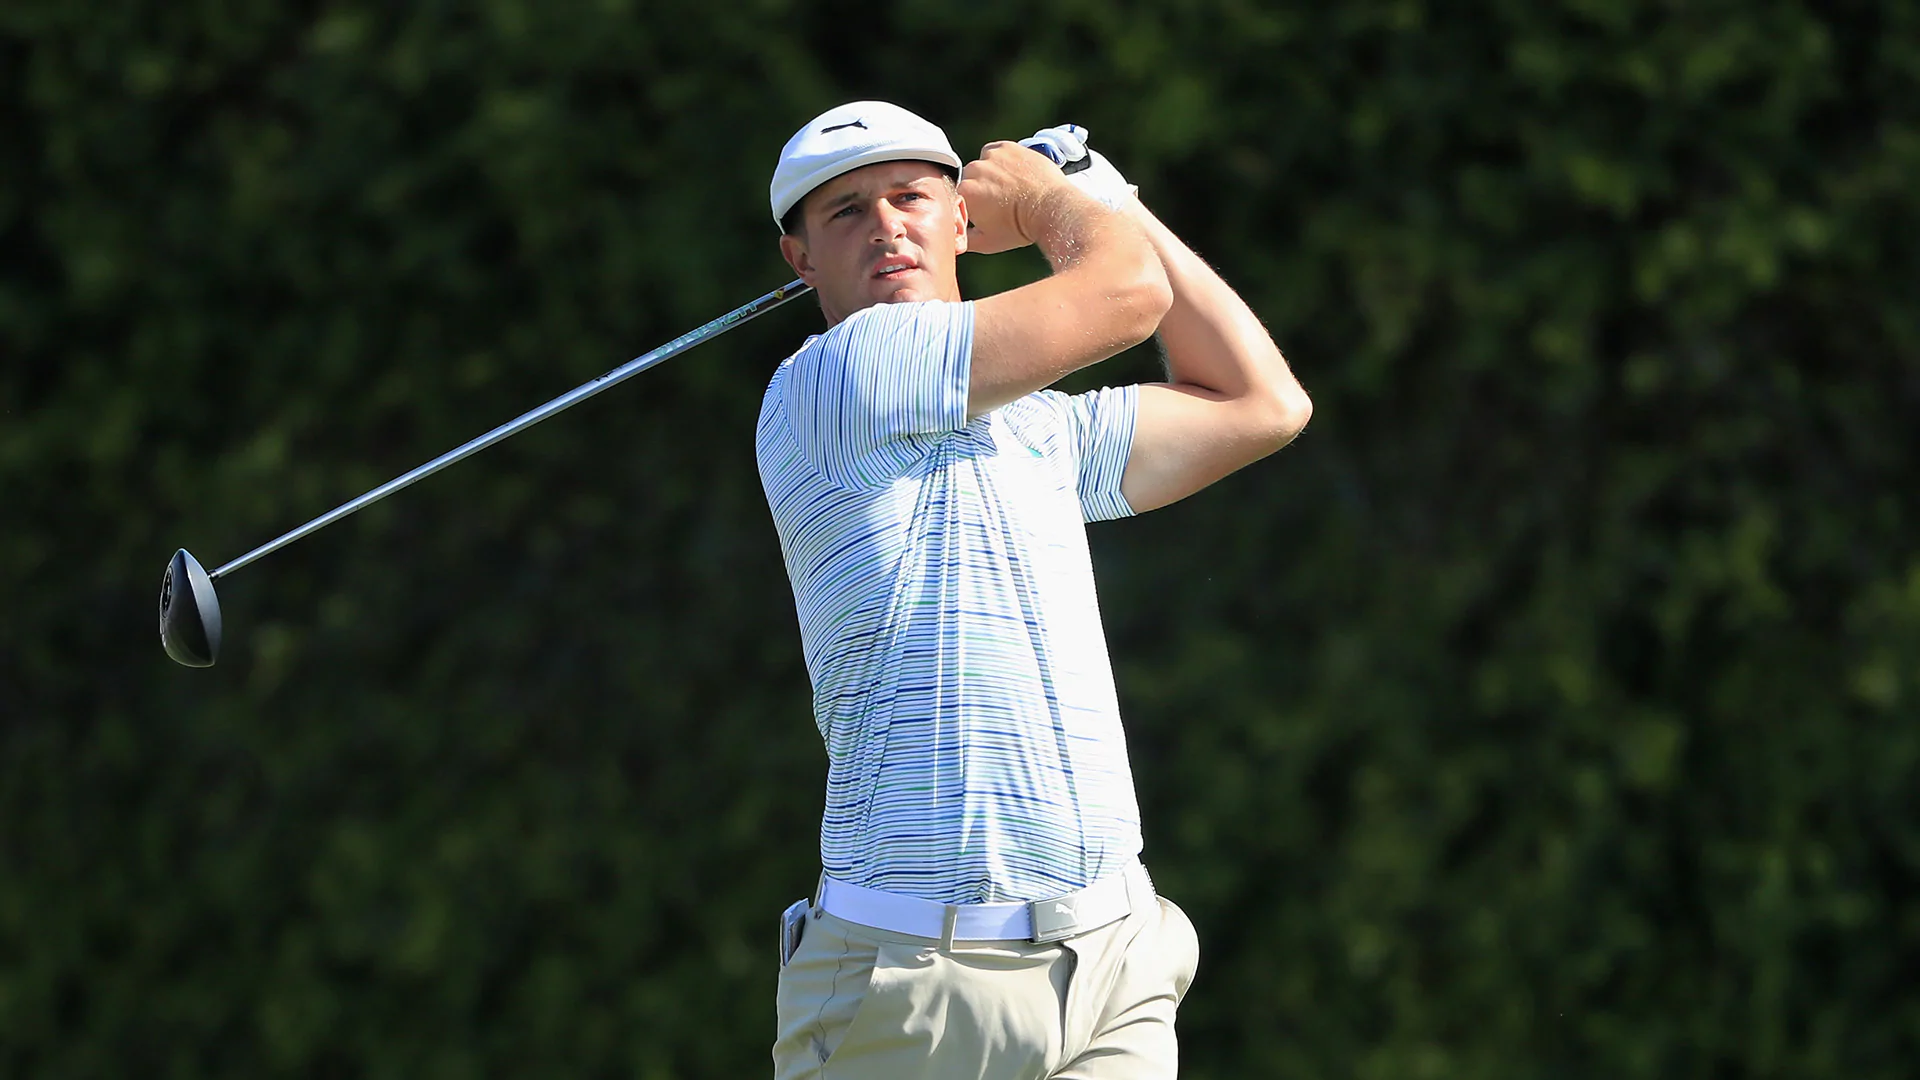 DeChambeau up to 12th in U.S. Ryder Cup race